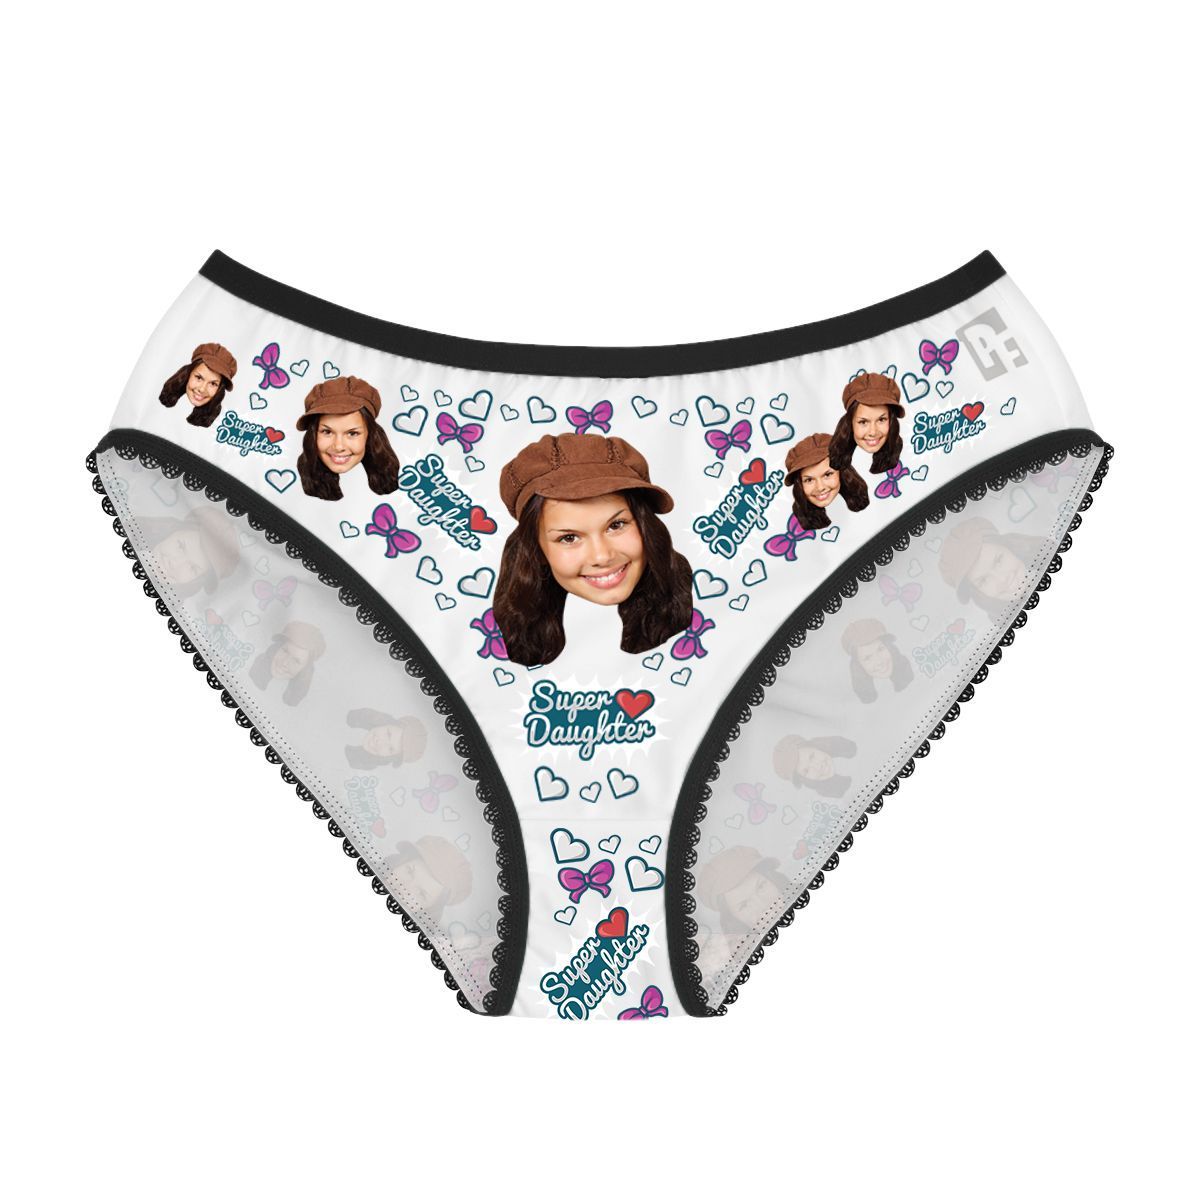 White Super daughter women's underwear briefs personalized with photo printed on them